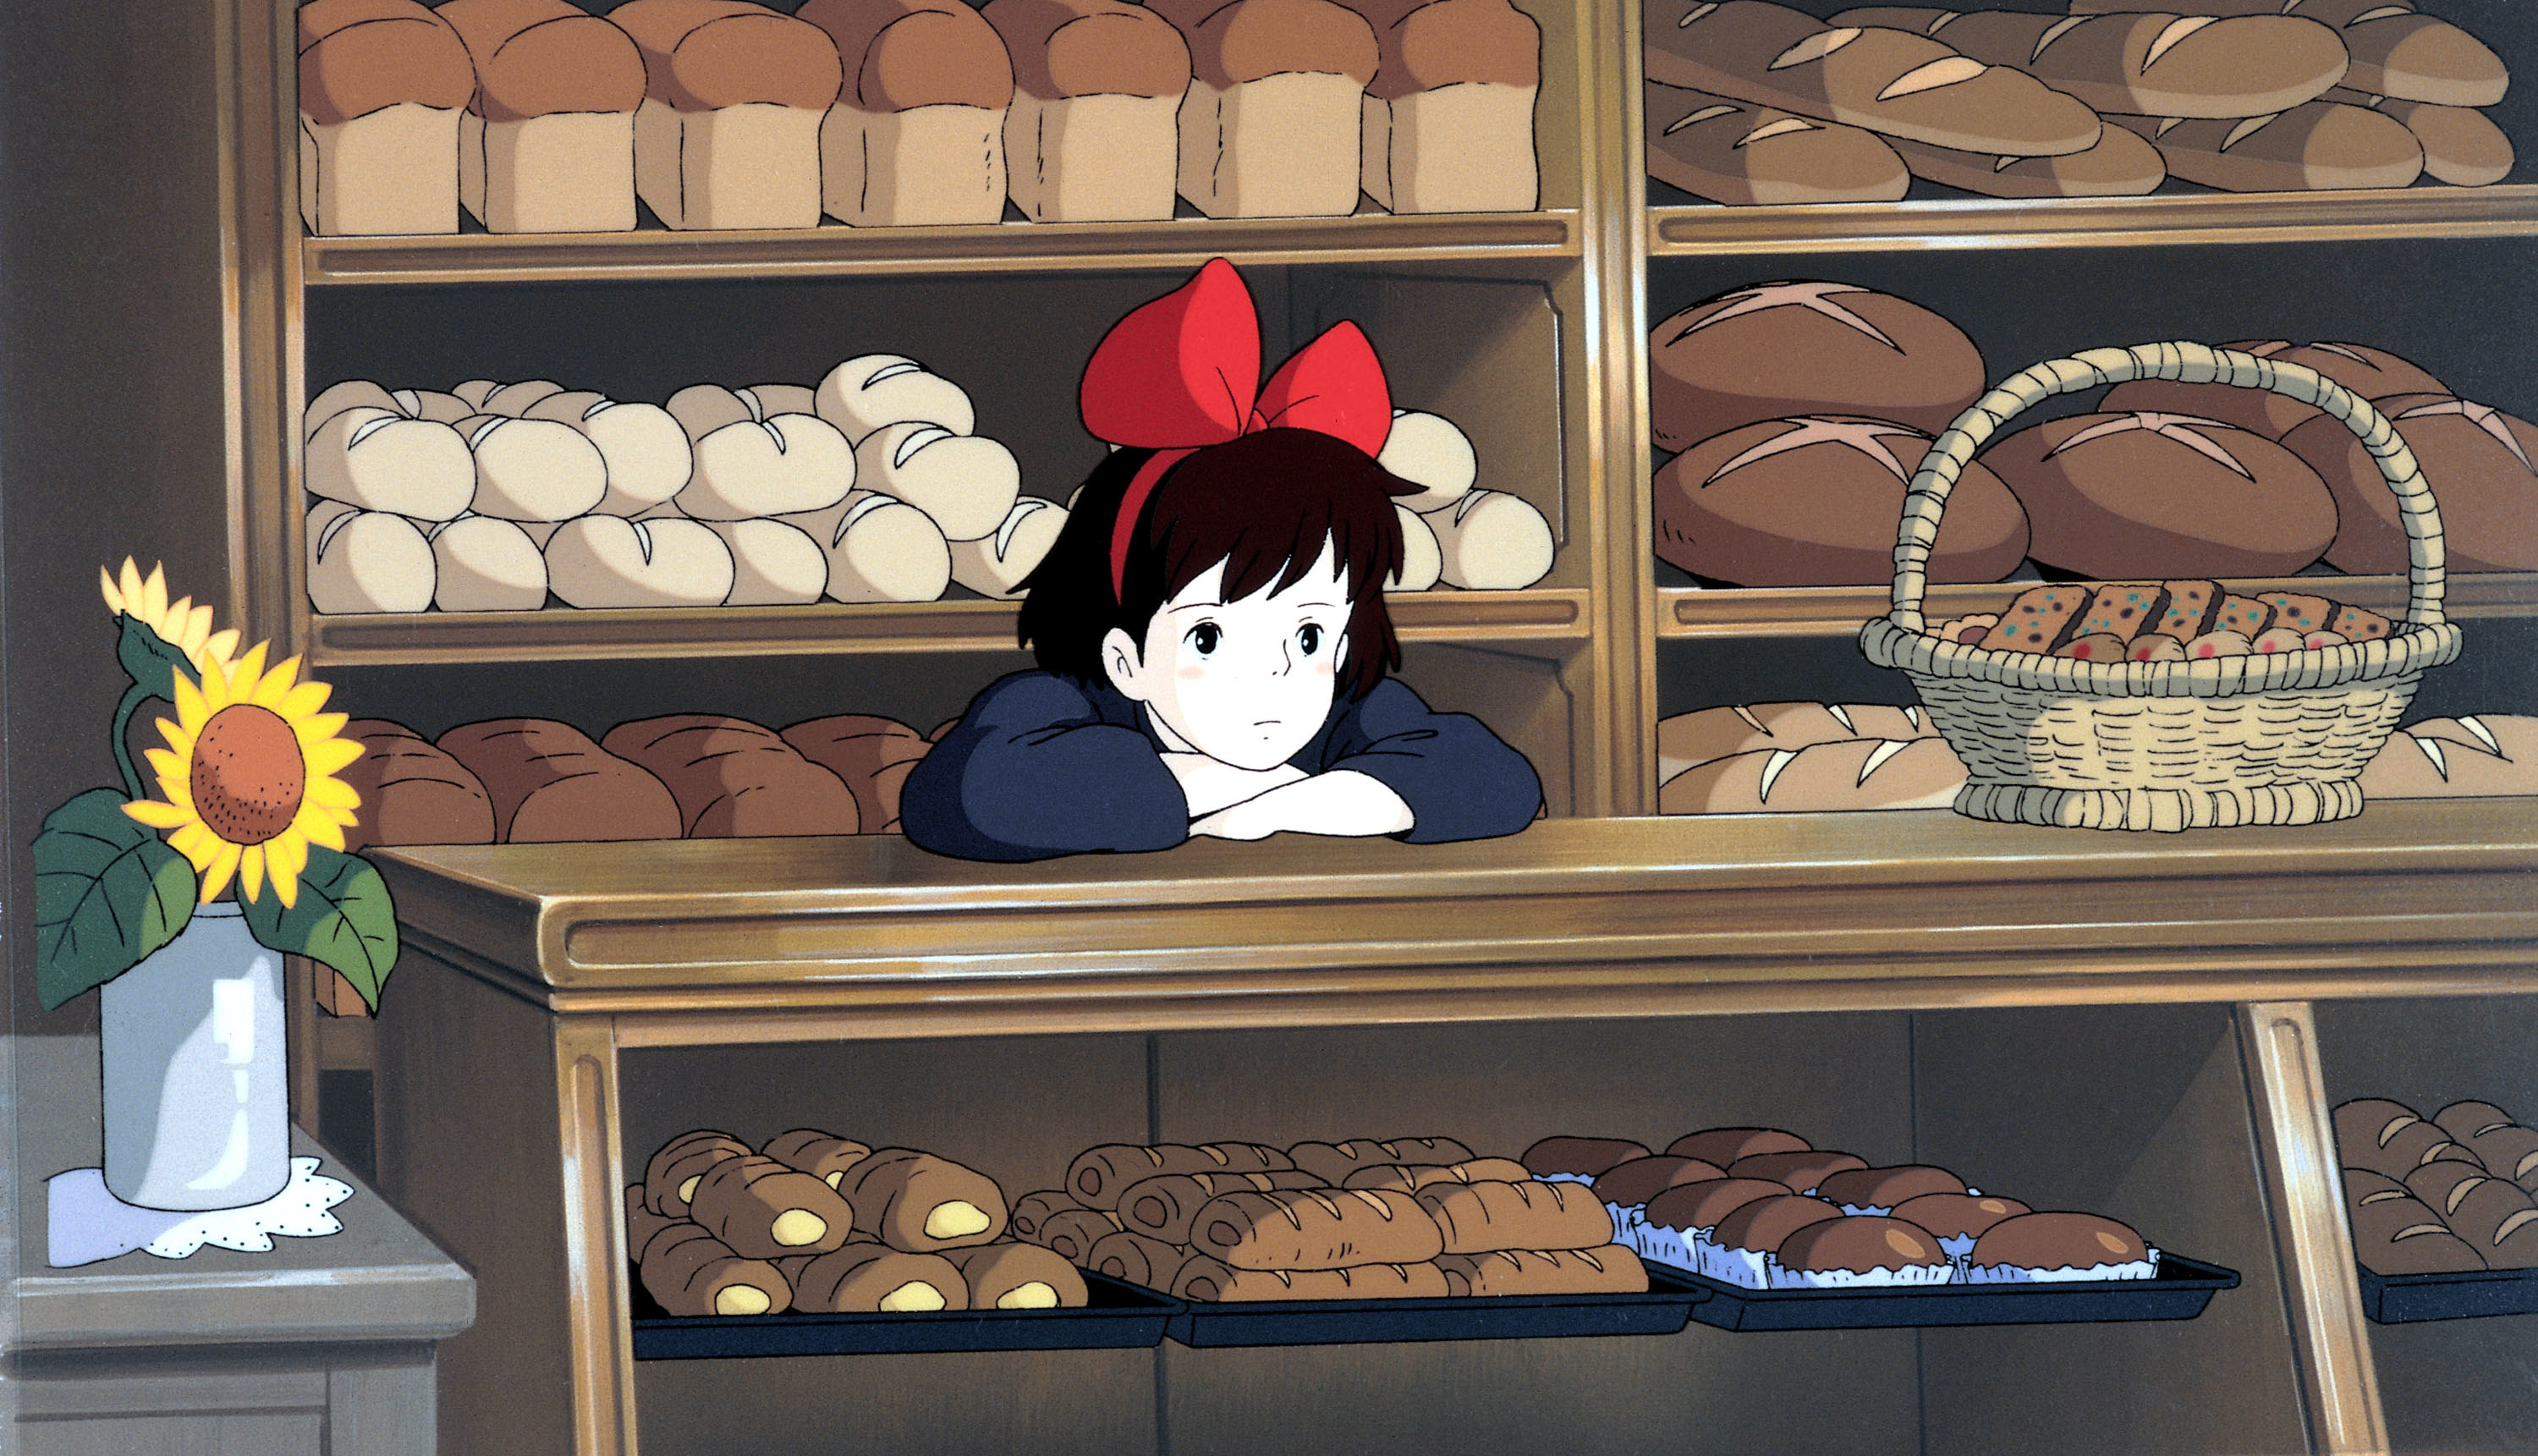 Kiki leaning on the counter of a bakery waiting for something